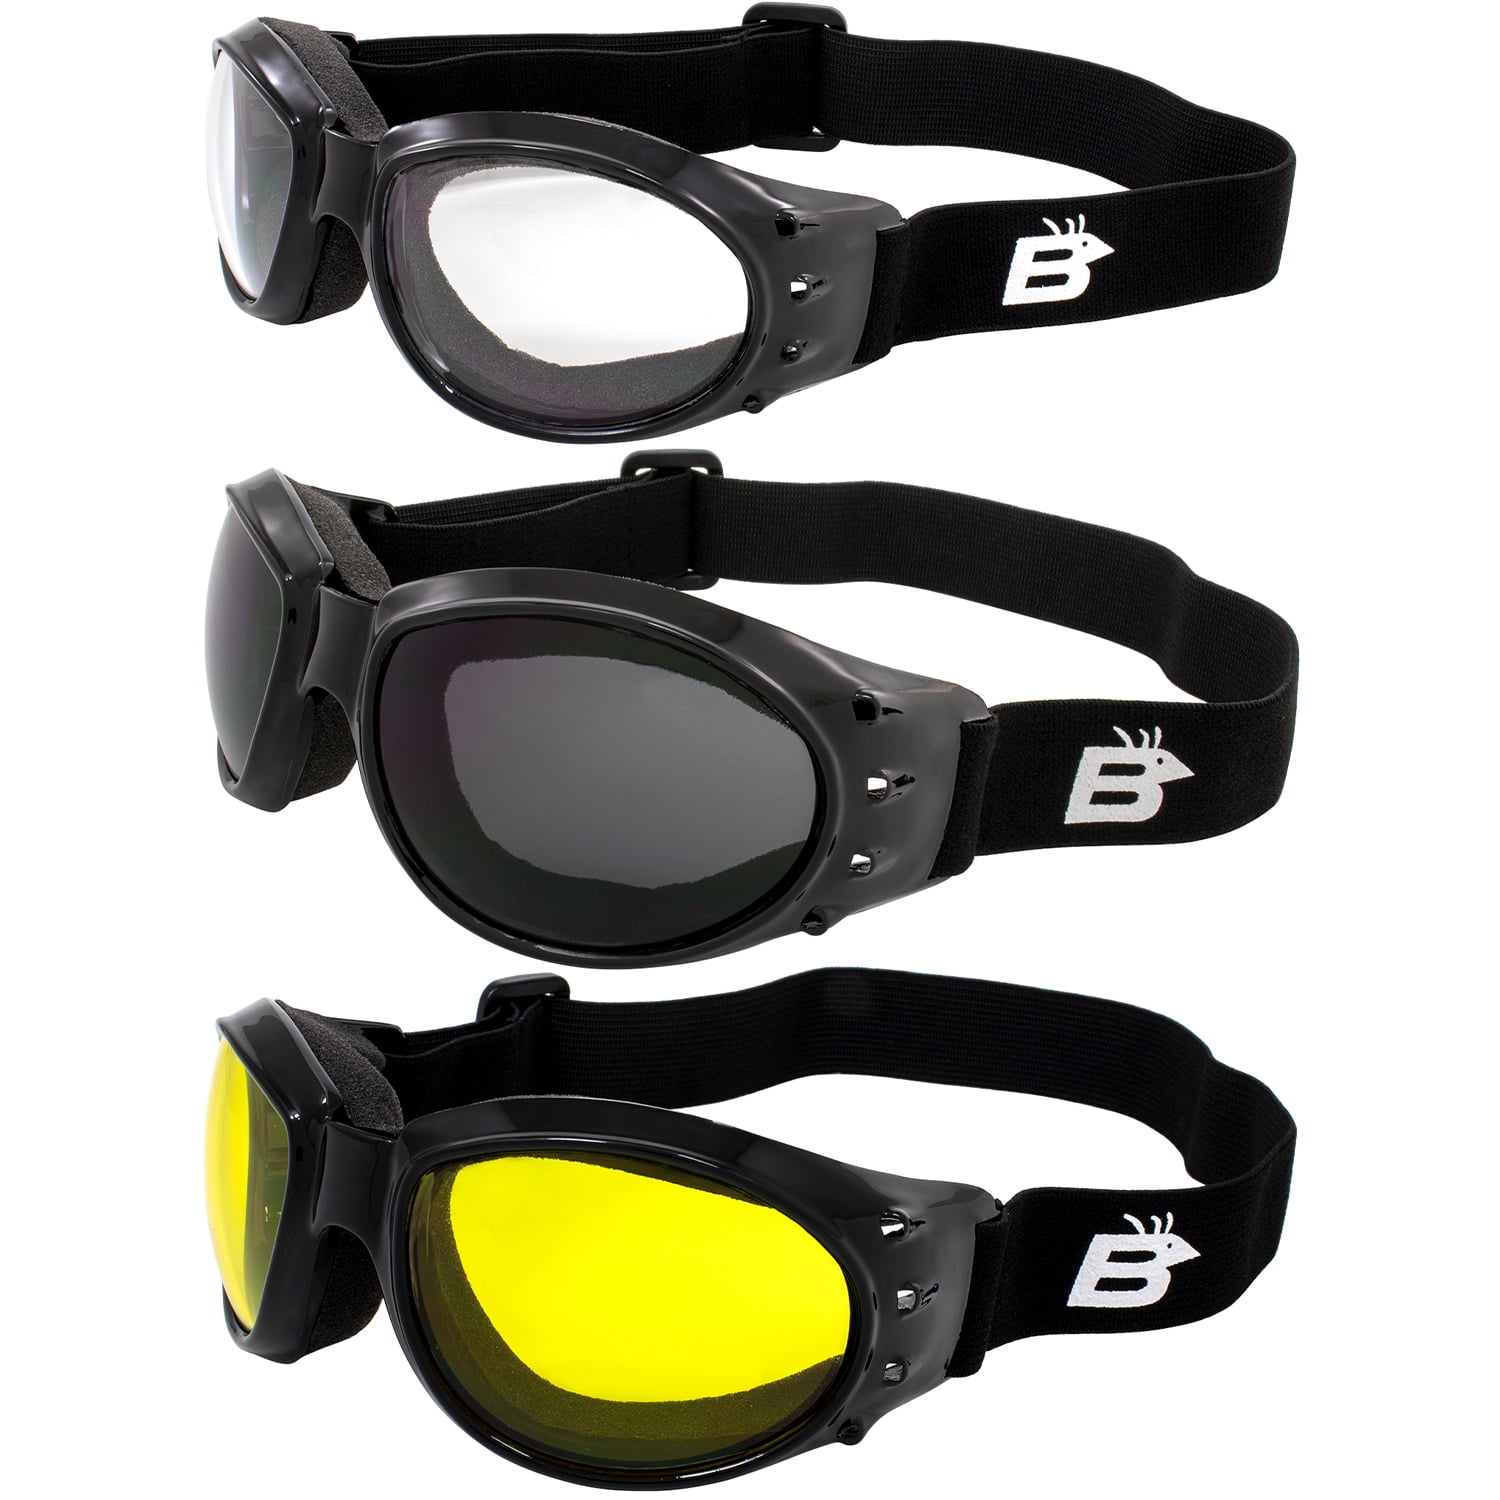 ELIMINATOR FLAME SMOKE LENS GOGGLES MOTORCYCLE RIDING WITH POUCH 